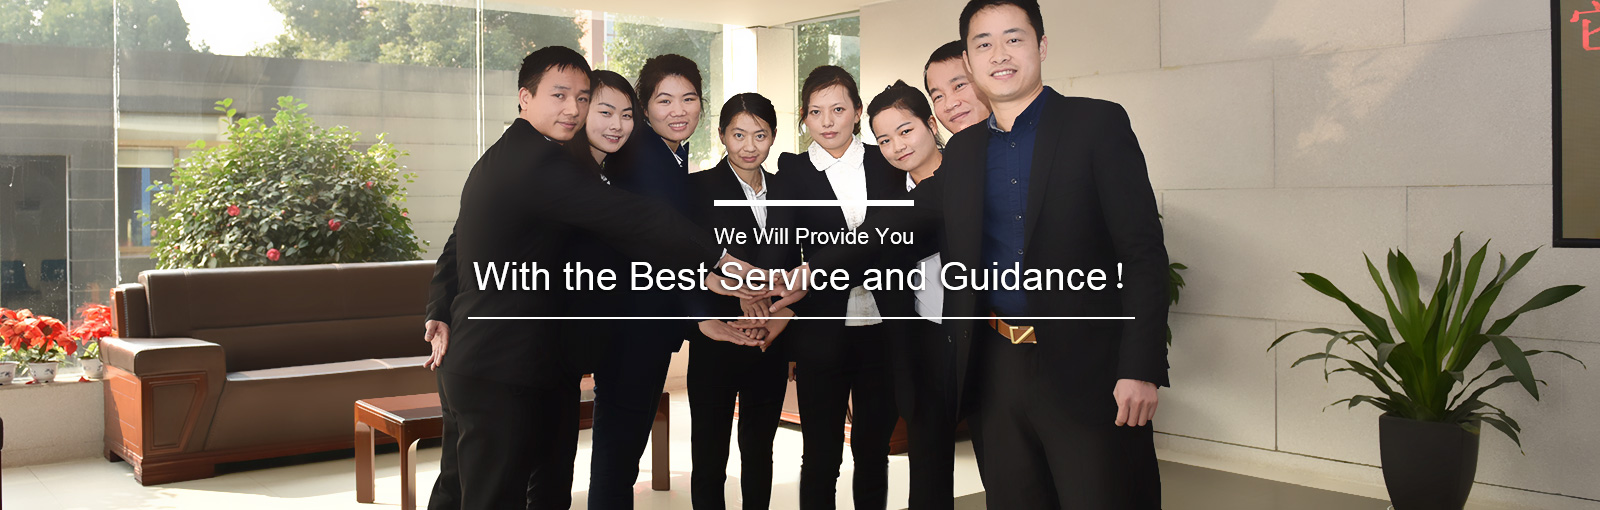 We will provide you with the best service and guidance!